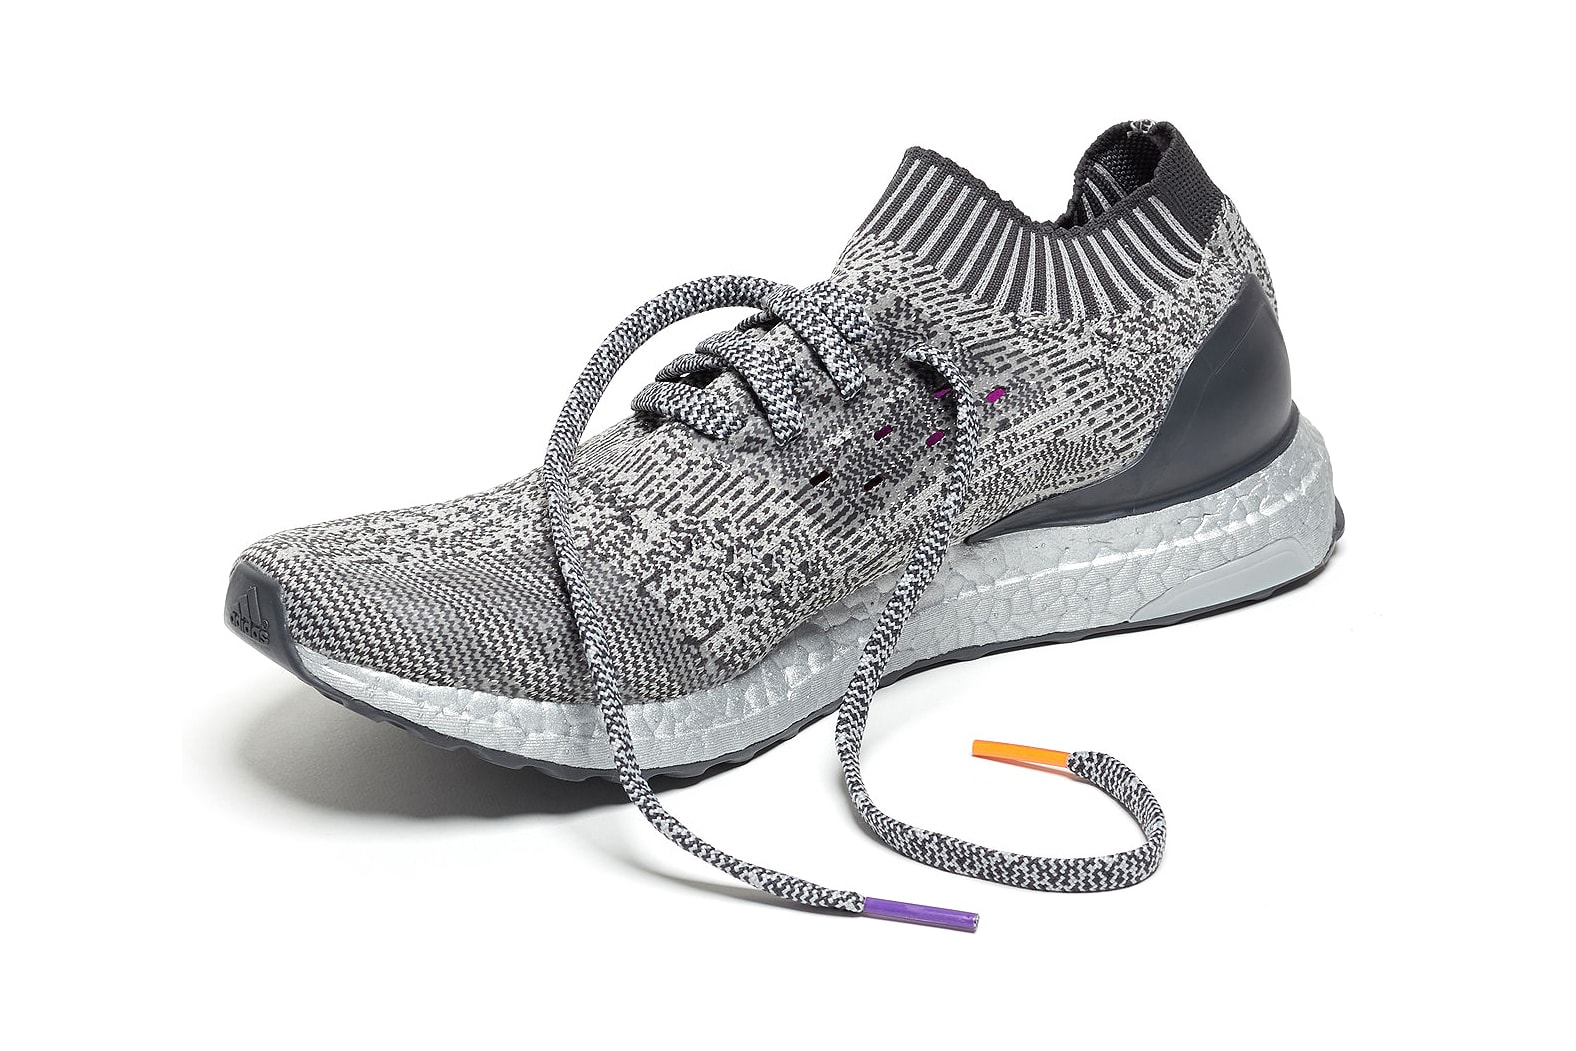 adidas UltraBOOST Uncaged Silver Release Date